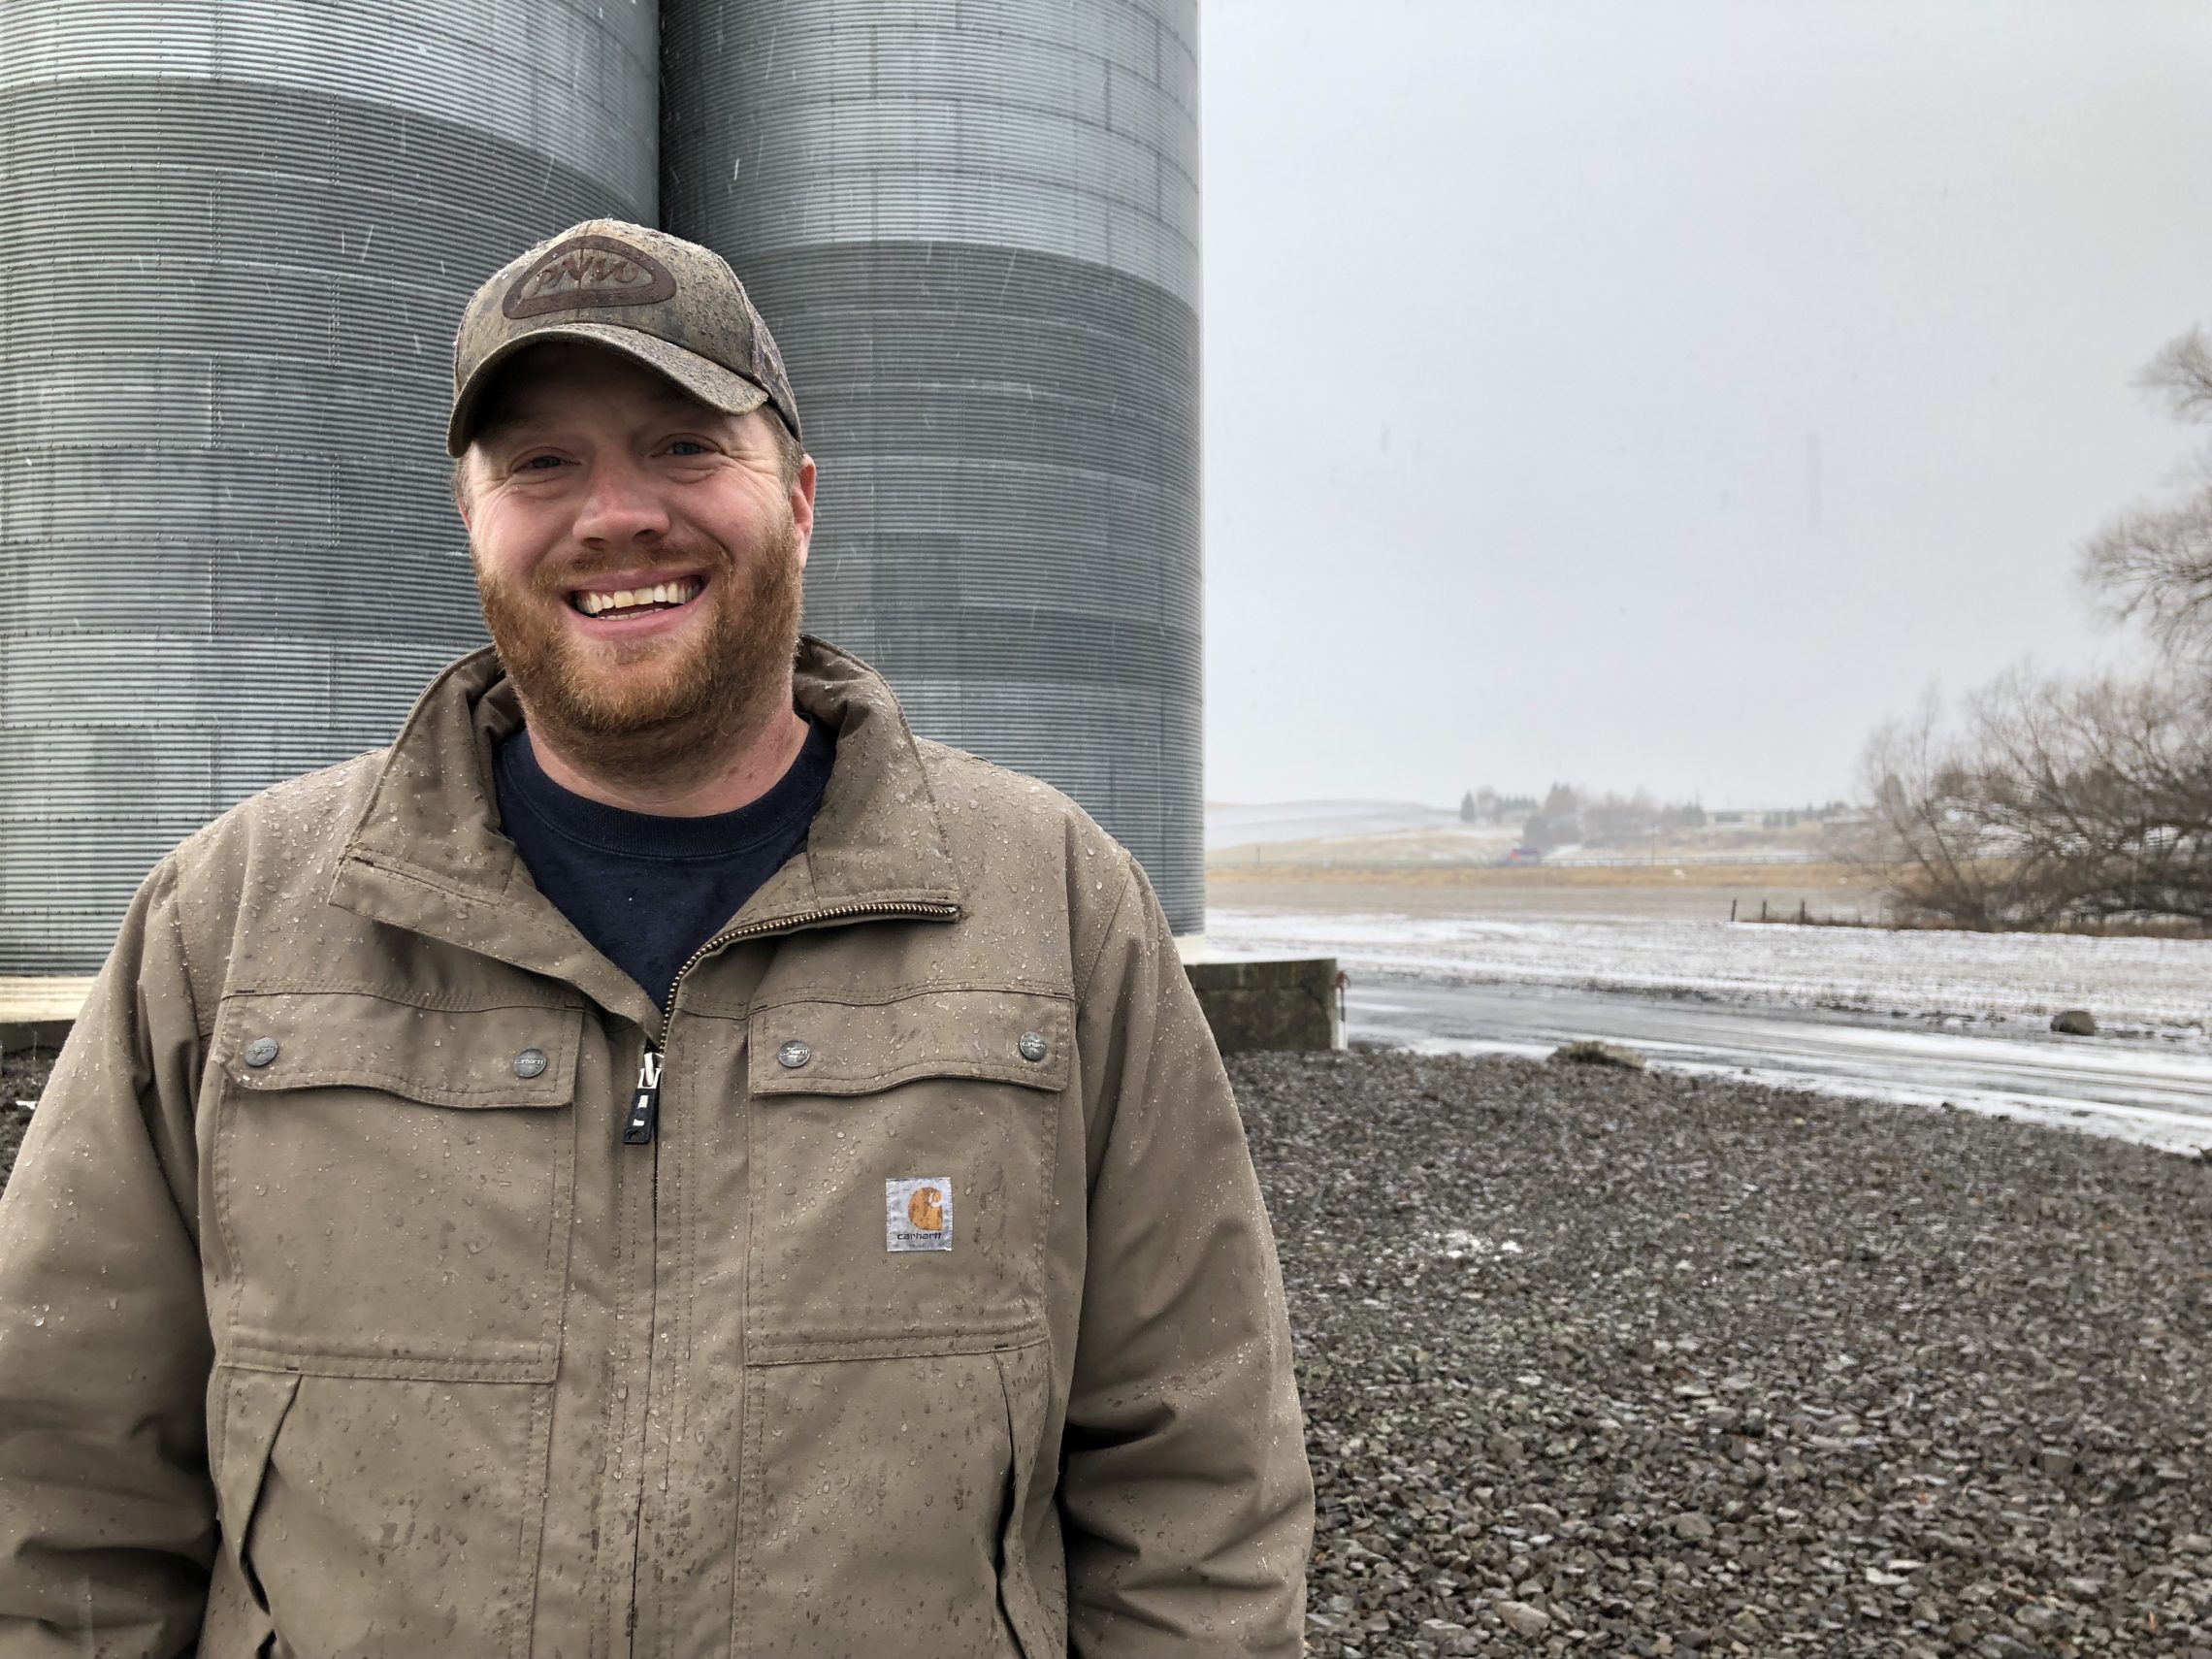 Allen Druffel, 34, of Colton, Wash., stands in front of the co-op silos that hold his unsold chickpeas. Last year he was getting 50 cents a pound for his pulse crop. Now, the going price is 18 cents a pound -- well below his cost of production.